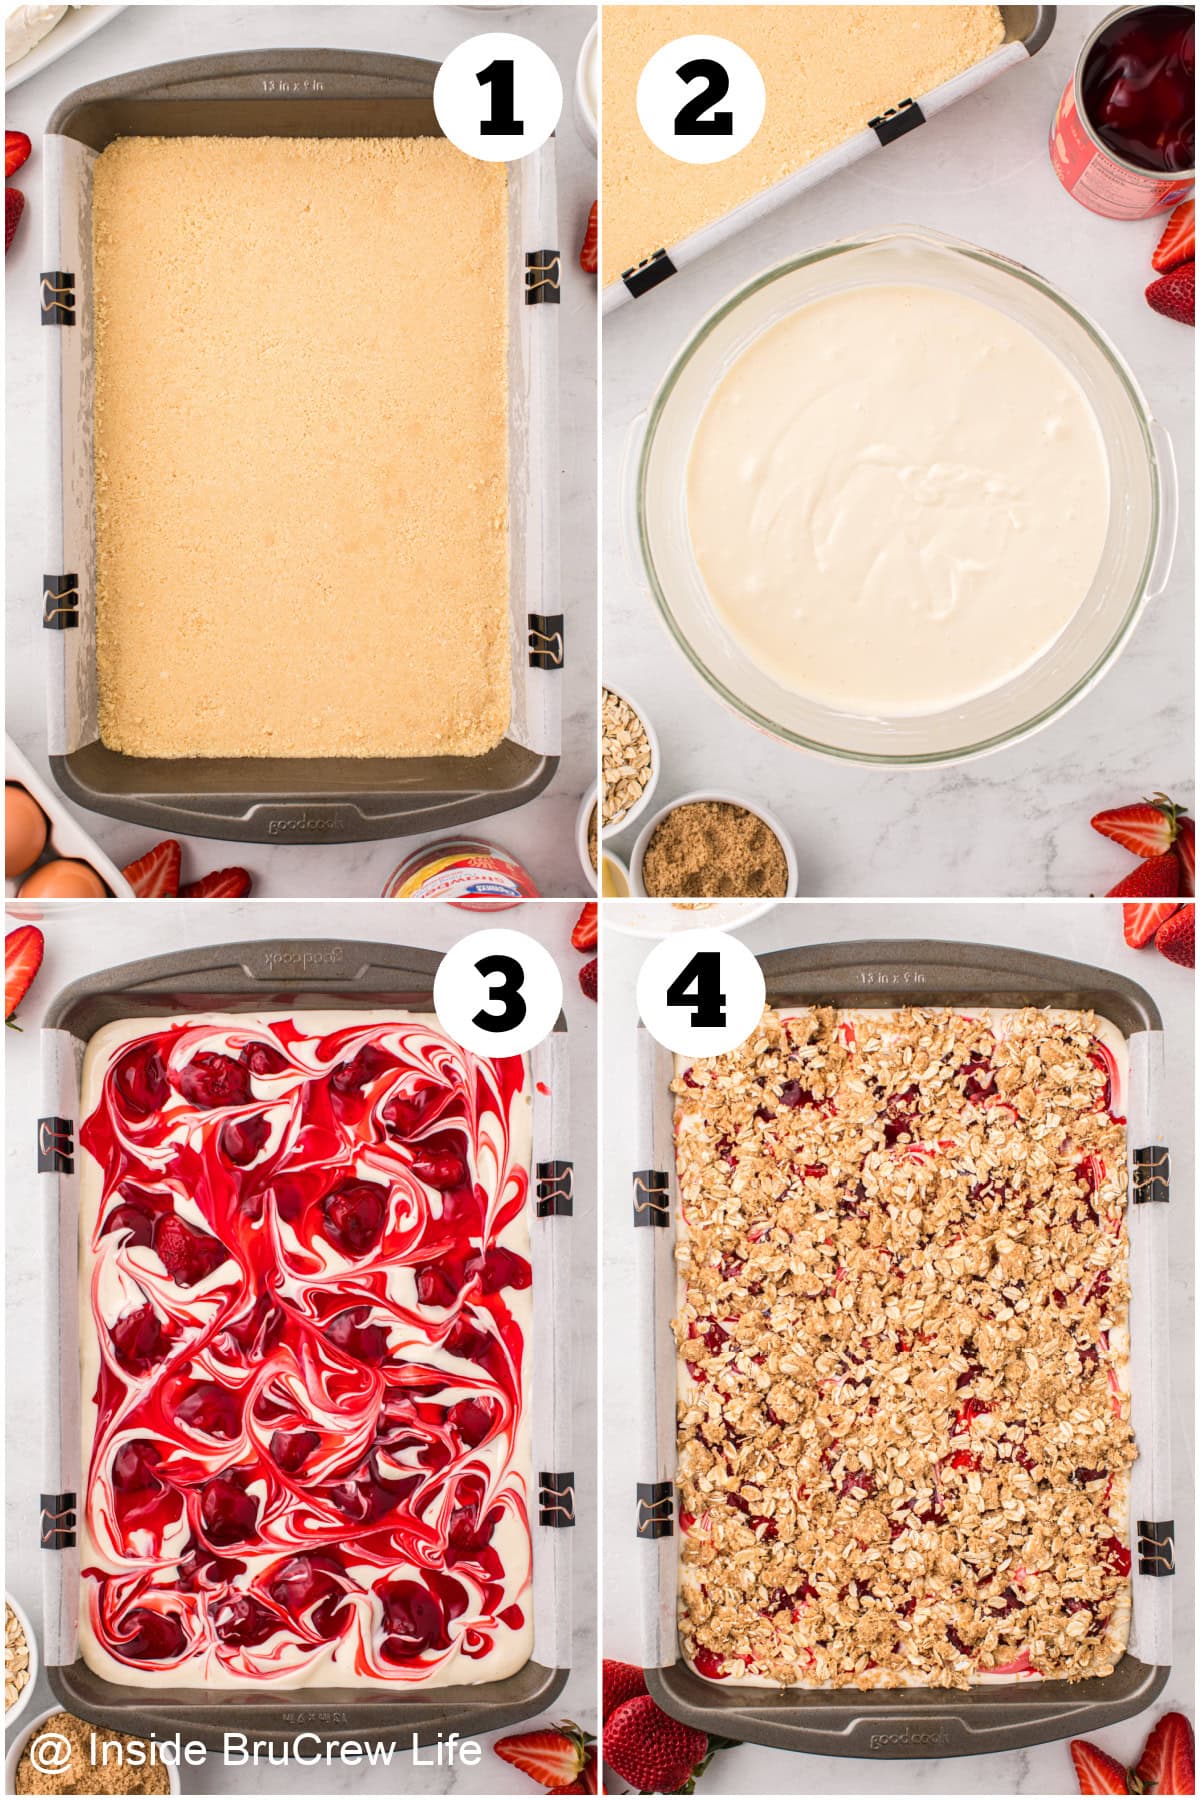 Four pictures collaged together showing how to make cheesecake bars with strawberry pie filling.